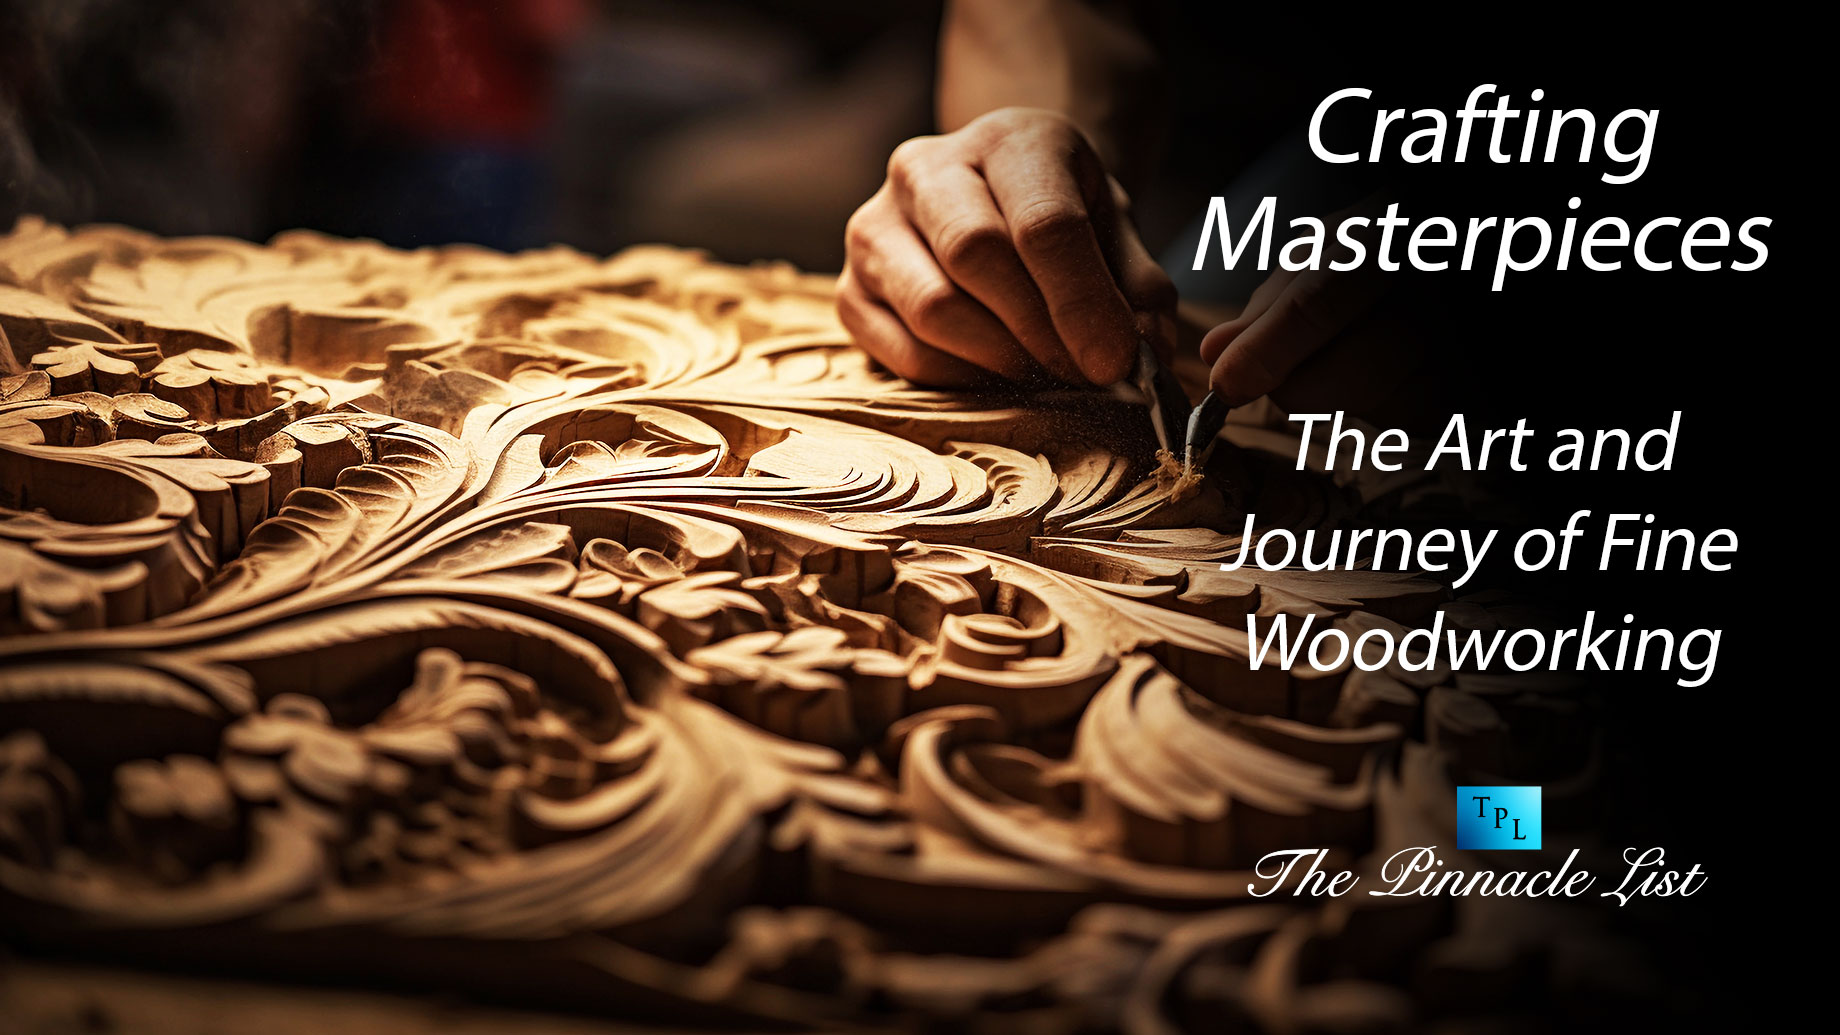 Crafting Masterpieces: The Art and Journey of Fine Woodworking